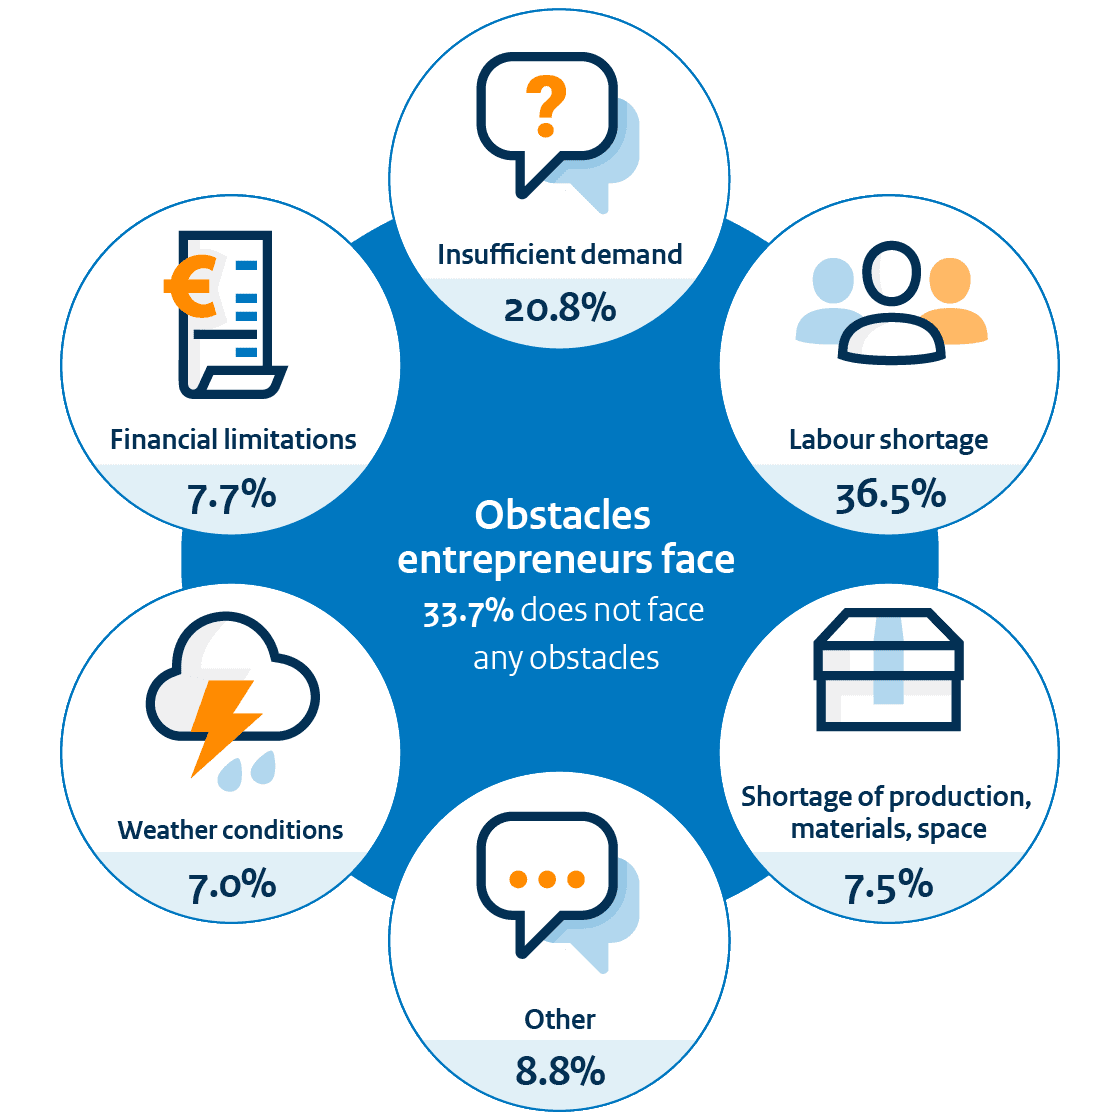 36.5% of entrepreneurs experience Labour shortage. Furthermore, insufficient demand (20.8%), financial limitations (7.7%), shortage of production, material and space (7.5%), weather conditions (7.0%) or other reasons (8.8%) constitute obstacles. 33.7% of entrepreneurs experience no barriers. The different obstacles now add up to more than 100%. Entrepreneurs can enter a maximum of 2 answers for the obstacle question. The percentage represents the proportion of entrepreneurs who chose this obstacle.